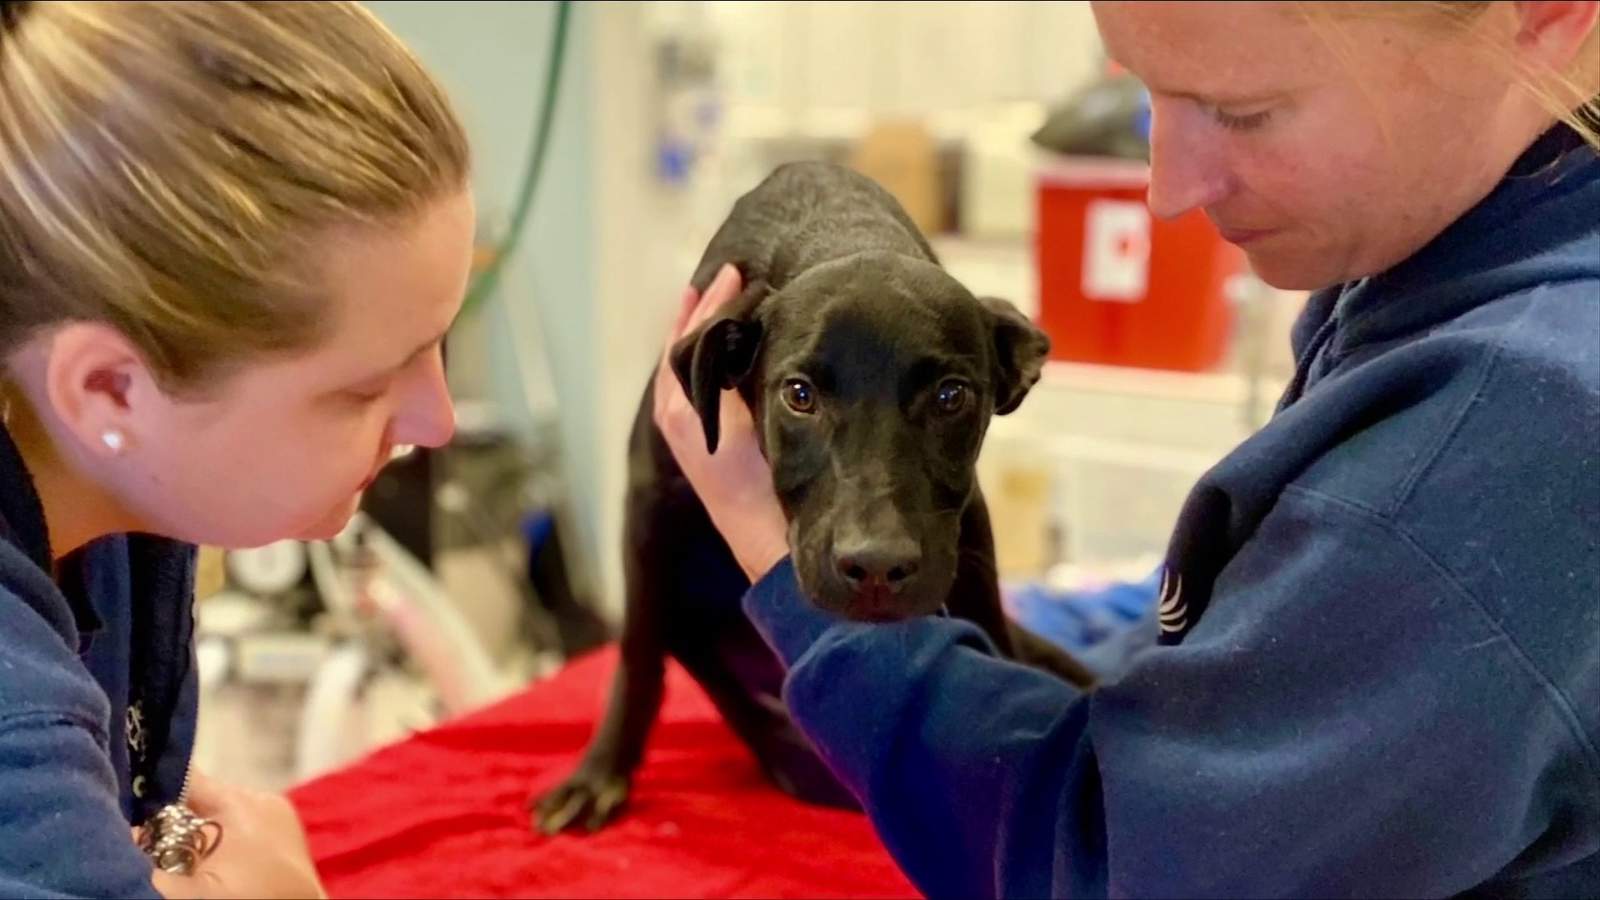 Paralyzed puppy left near dumpster gets treatment at Angels of Assisi